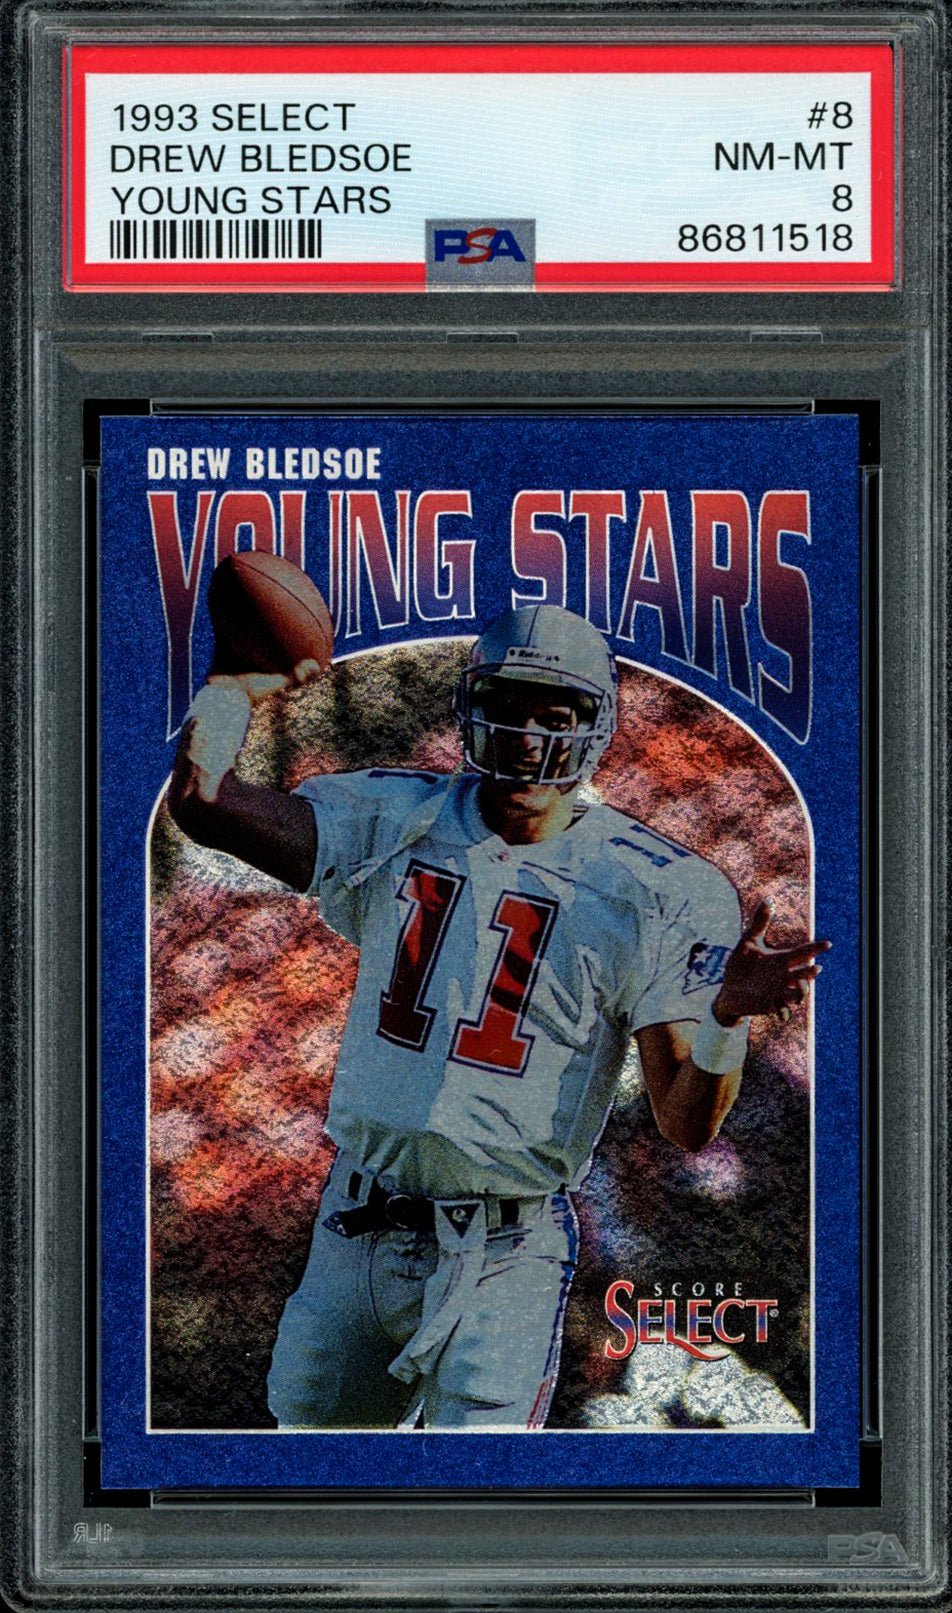 DREW BLEDSOE PSA 8 1993 Select Young Stars RC #8 Football Base Graded Cards RC - Hobby Gems